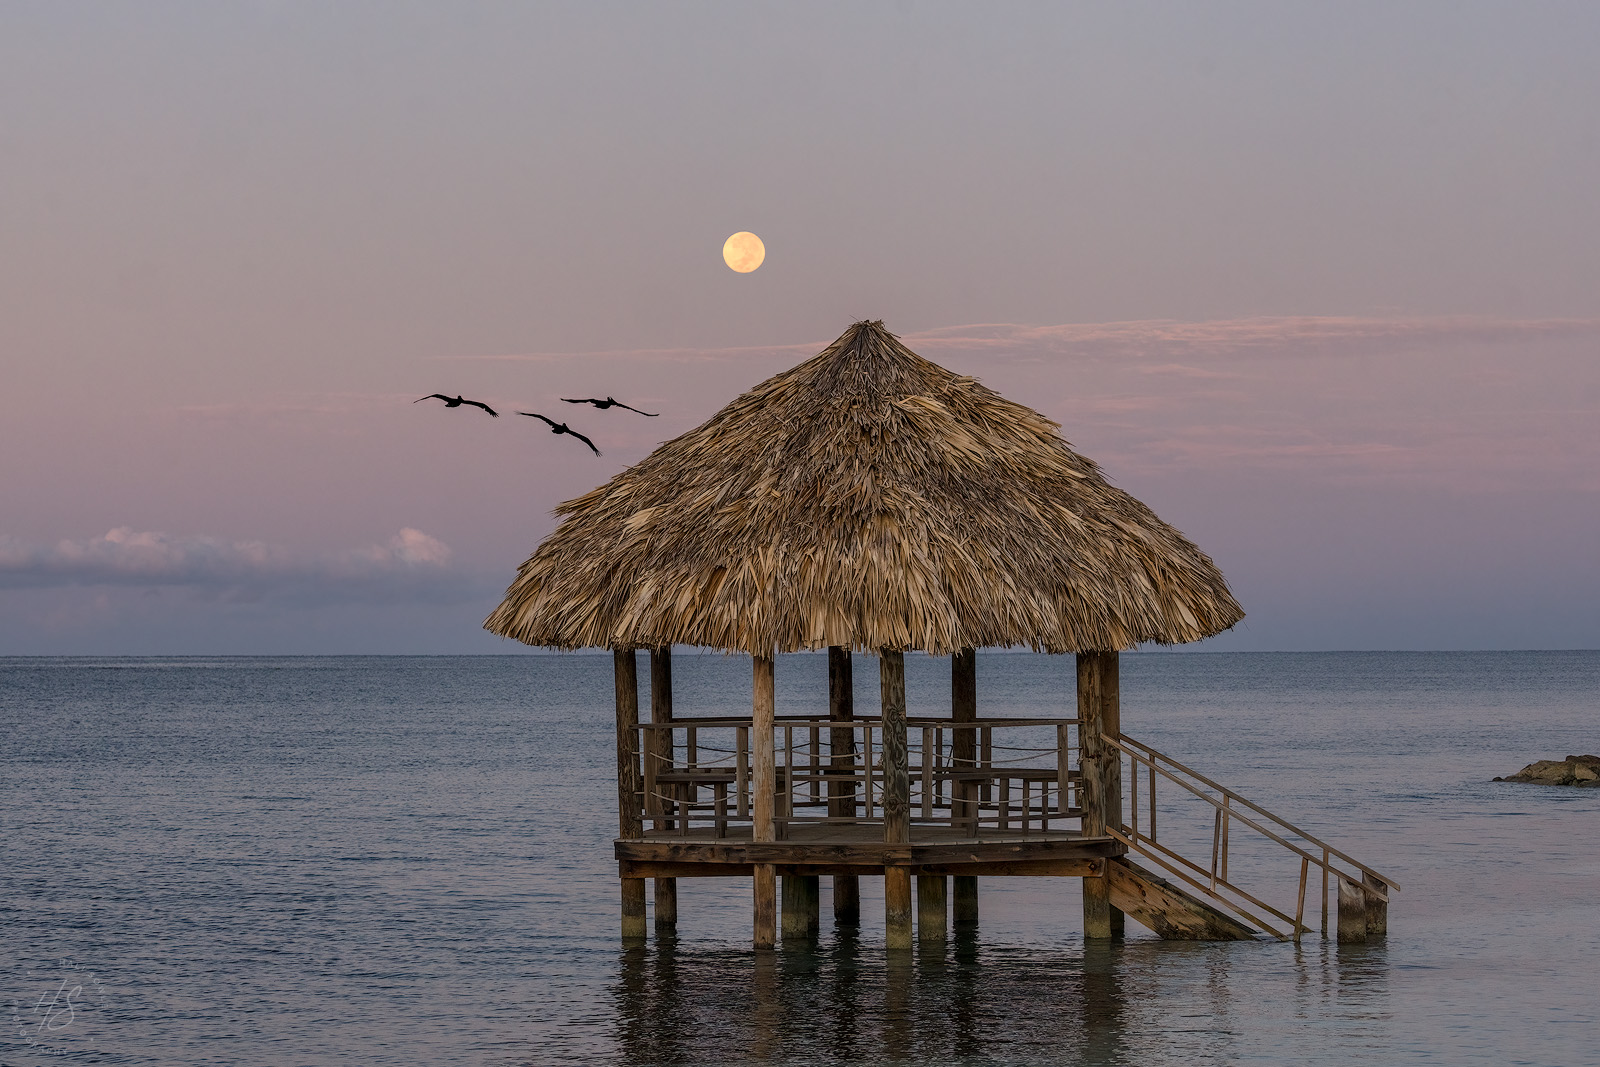 2021_09_SandalsSouthCoast-10308-Edit1600.jpg - The full moon setting just after sunrise with some Pelicans flying through.